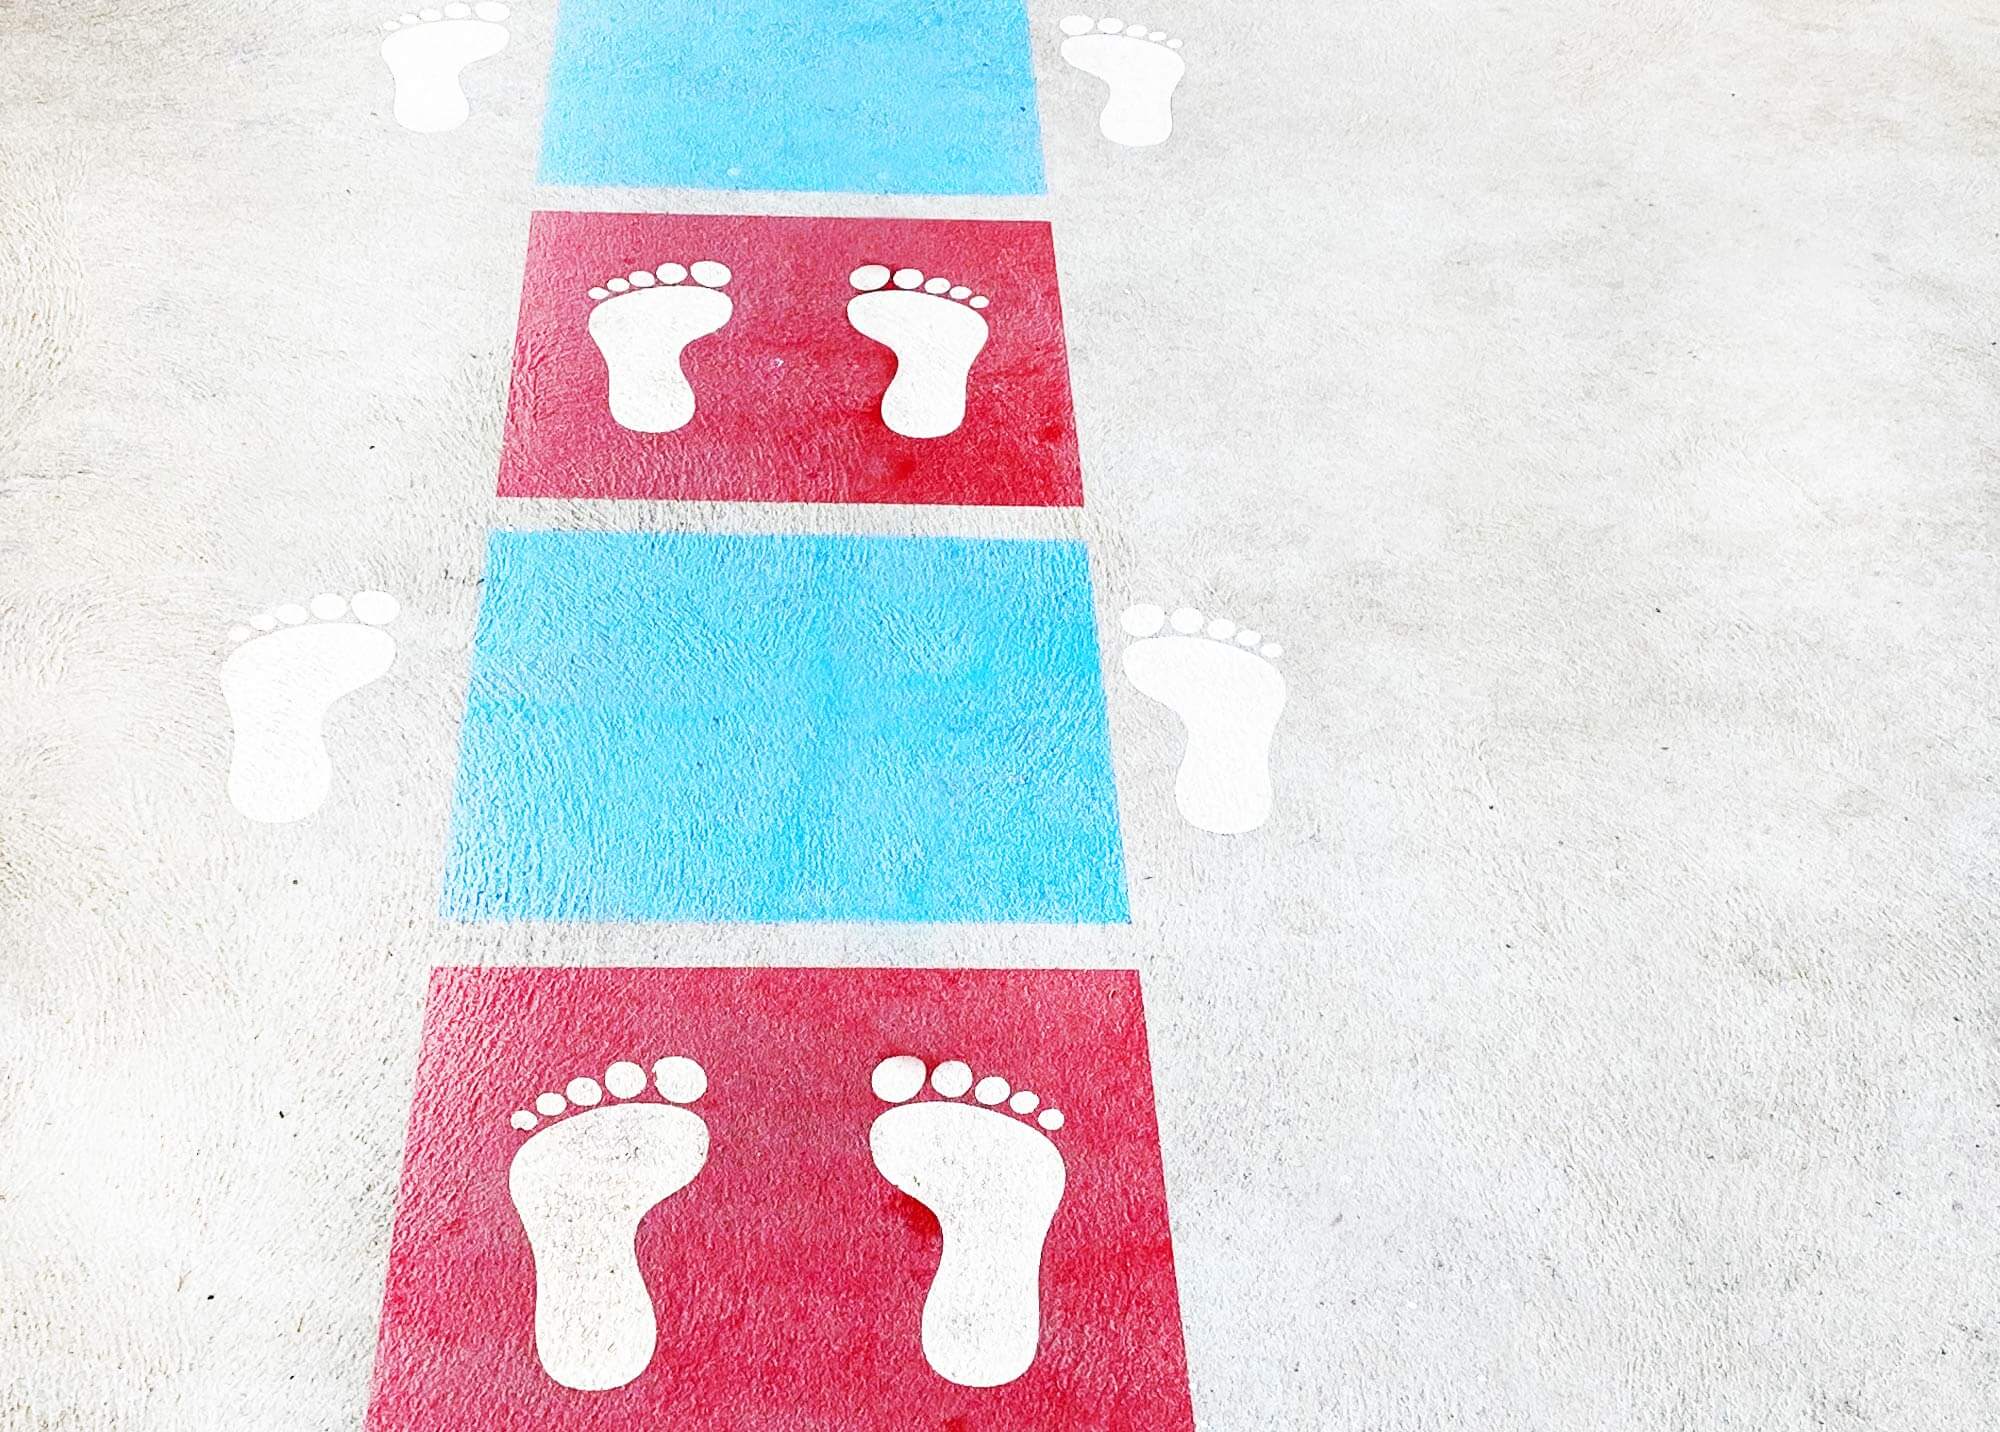 Efficient School Line Marking Solutions for Fun and Compliance